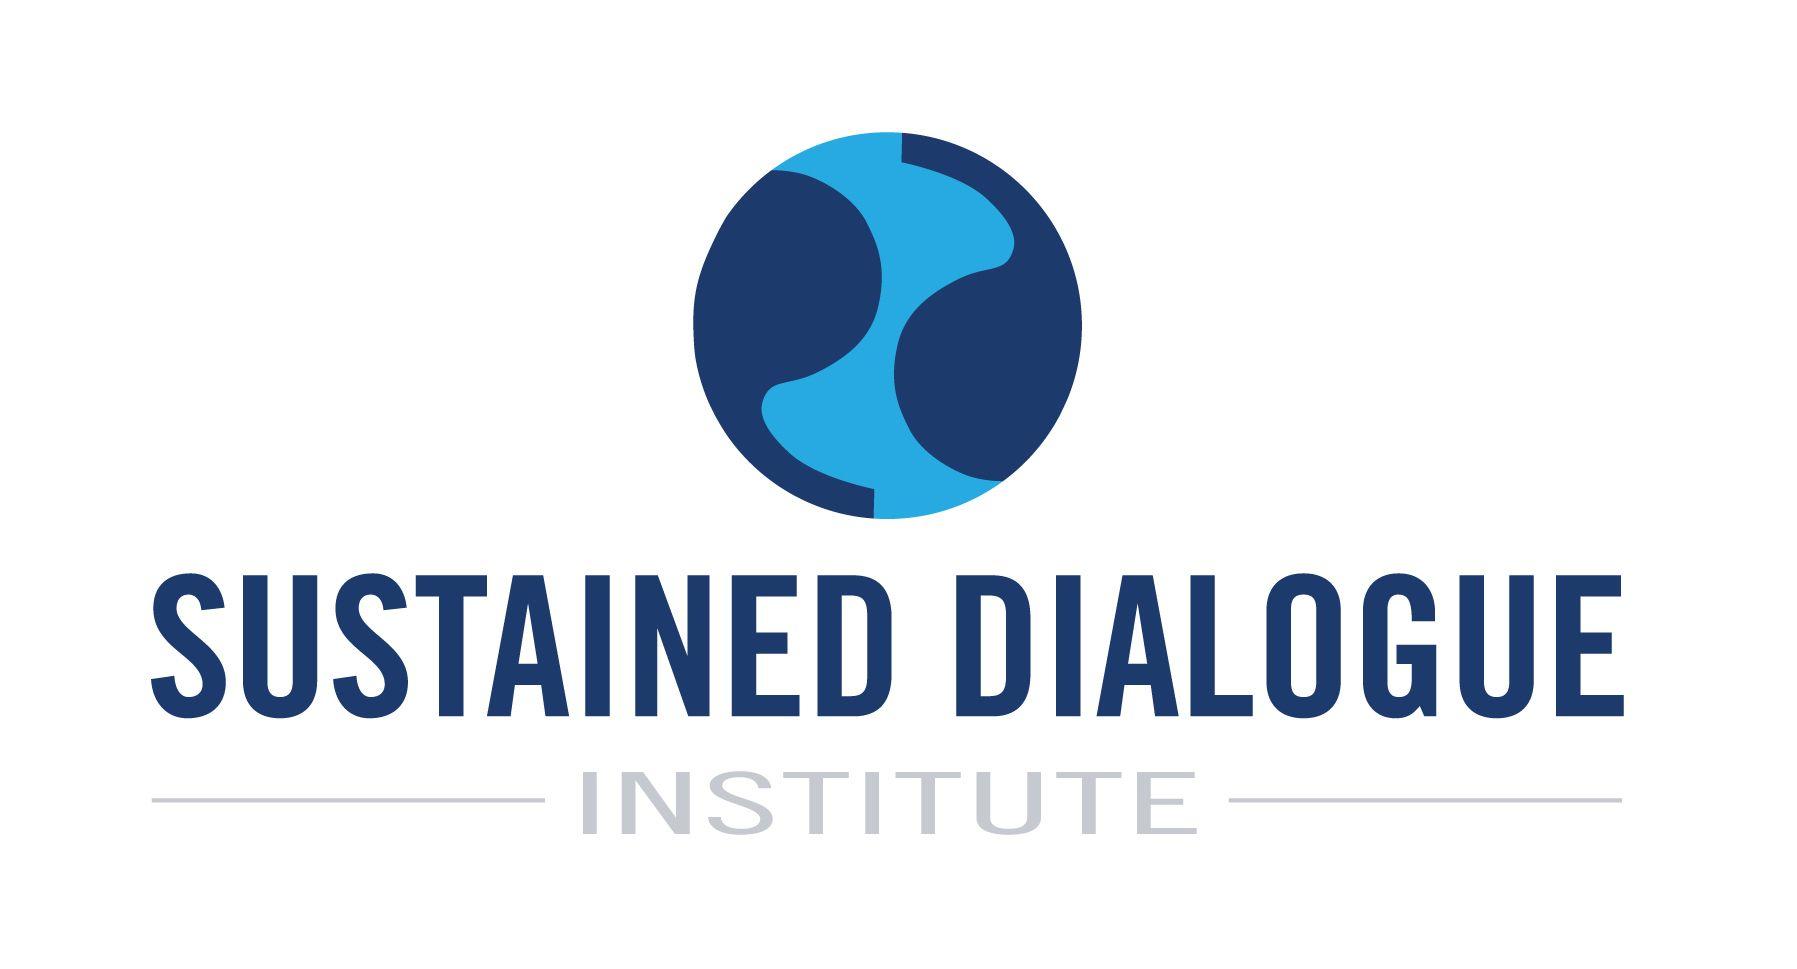 Dialogue Logo - Sustained Dialogue Institute